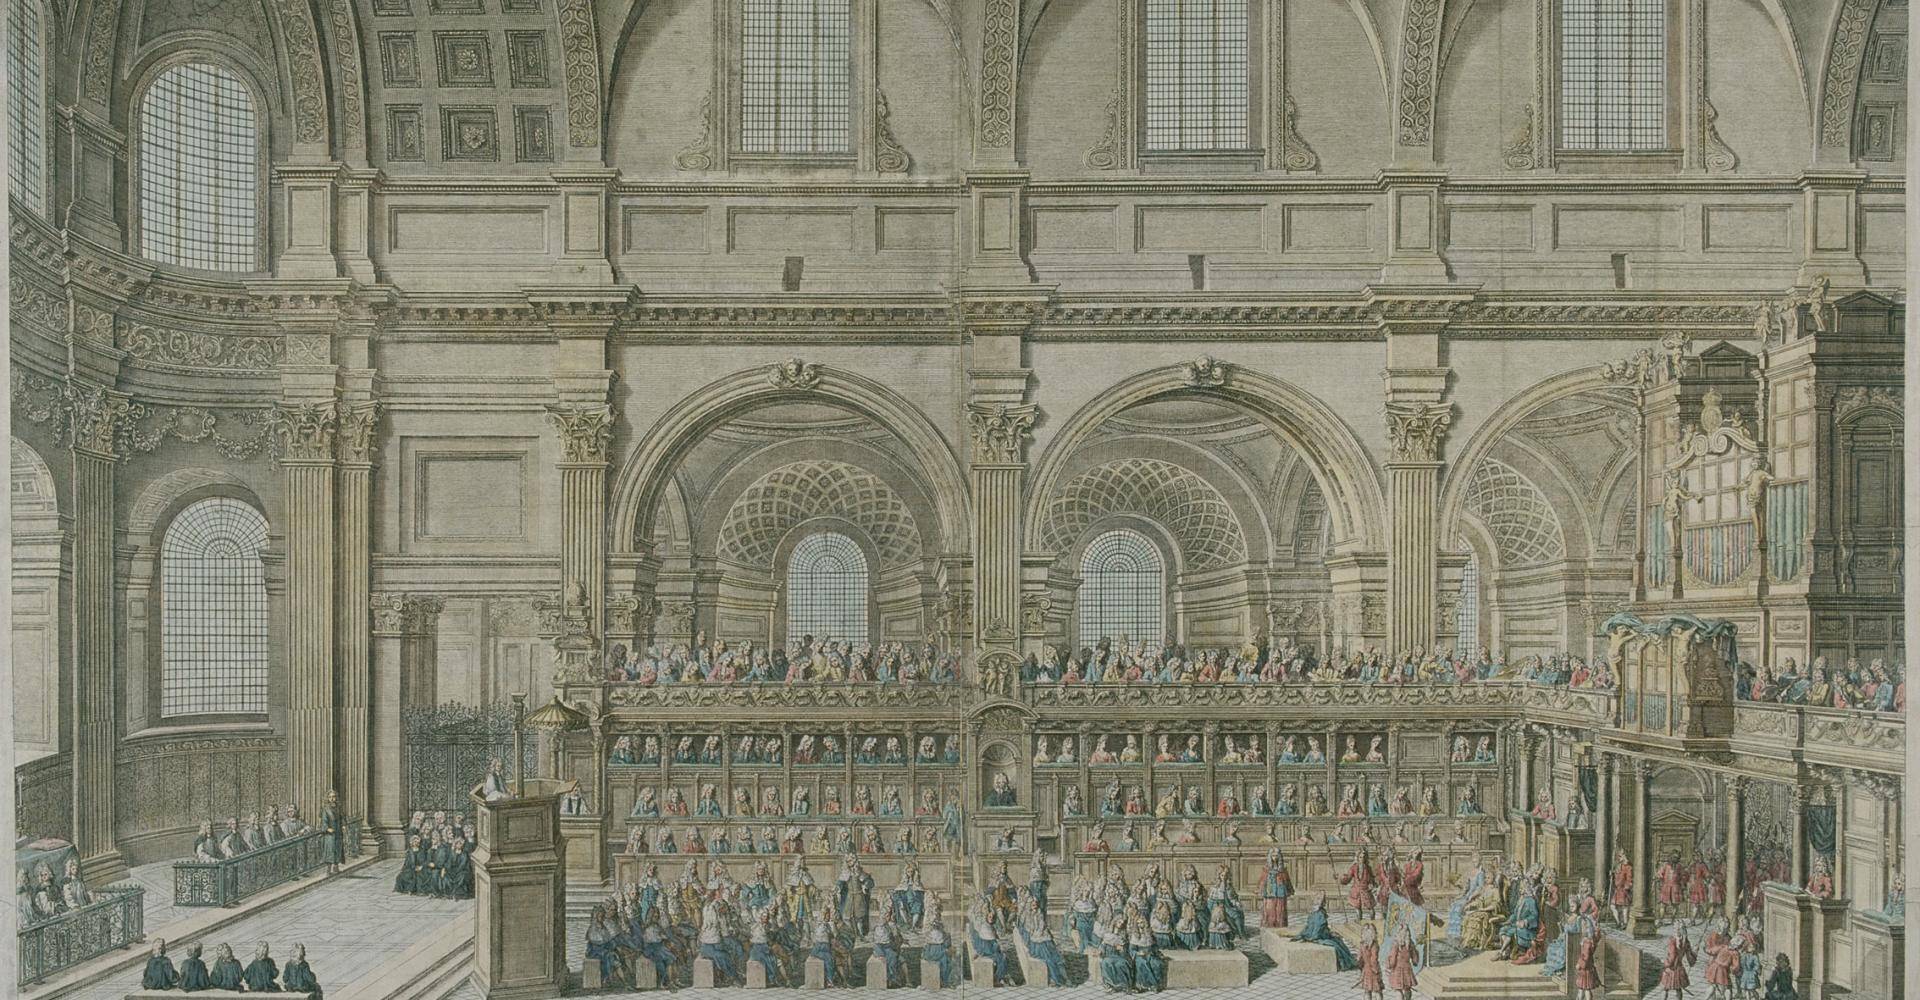 Fig. 6. Robert Trevitt's engraved view of the choir at a thanksgiving service attended by Queen Anne, 31 December 1706 (© City of London, London Metropolitan Archives)